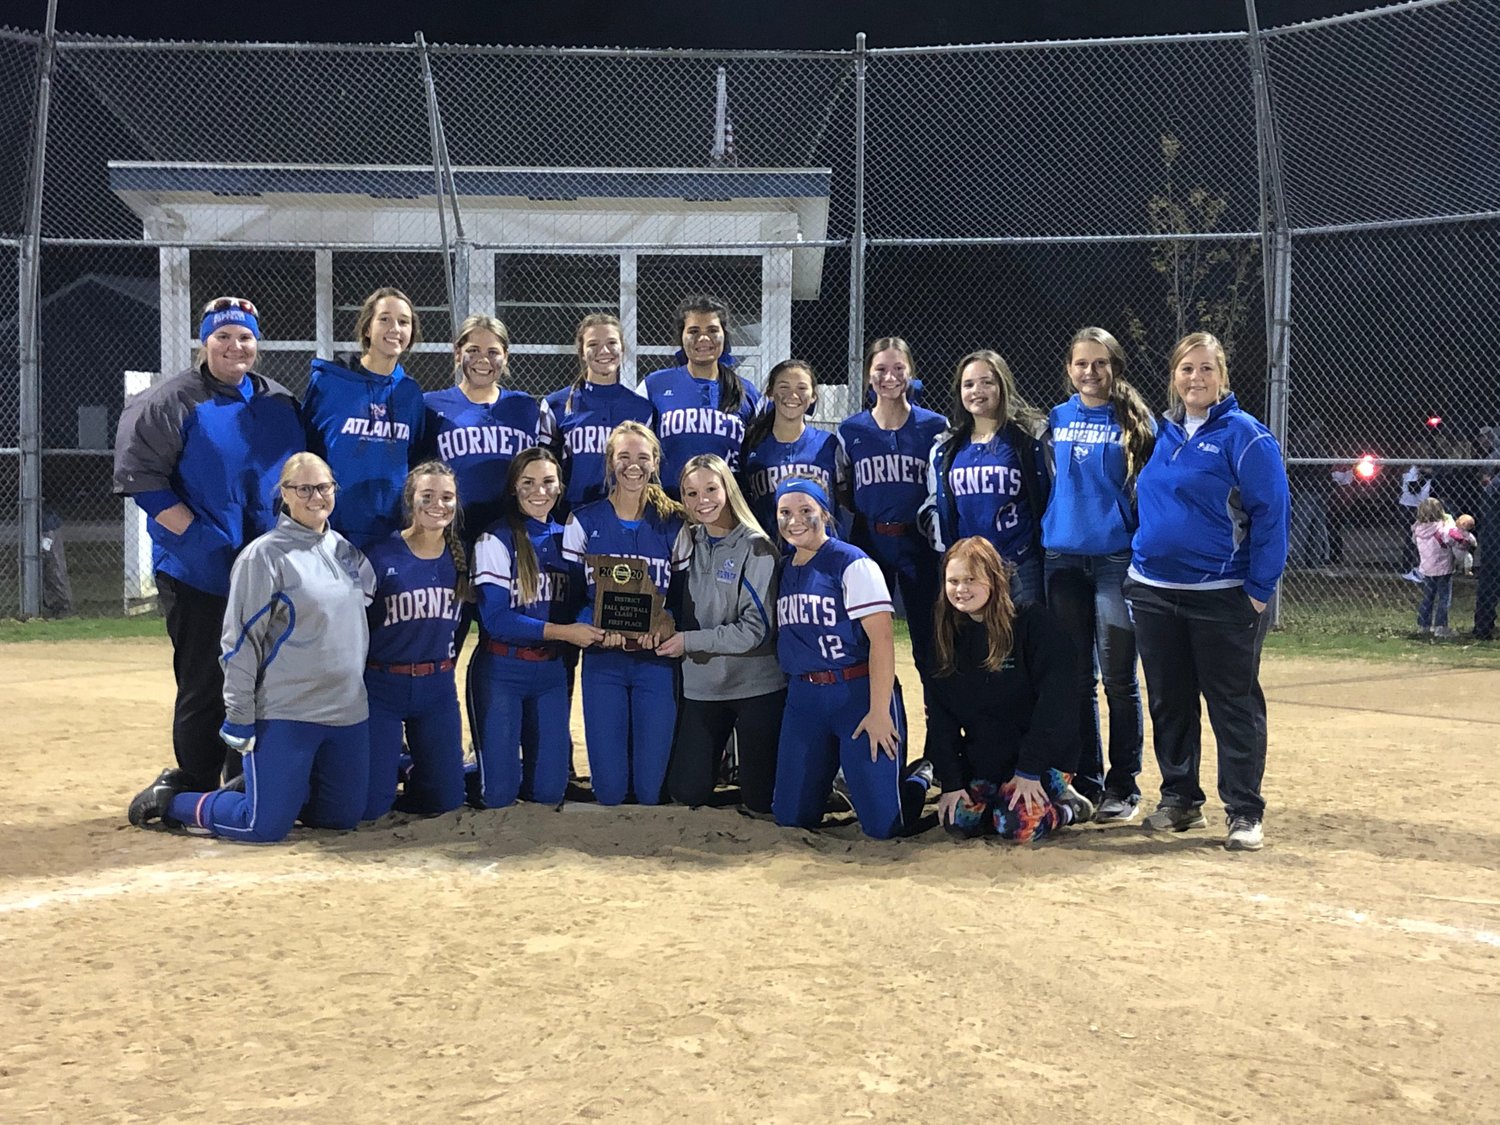 The Atlanta softball team poses with its district trophy after beating Linn County on Friday night